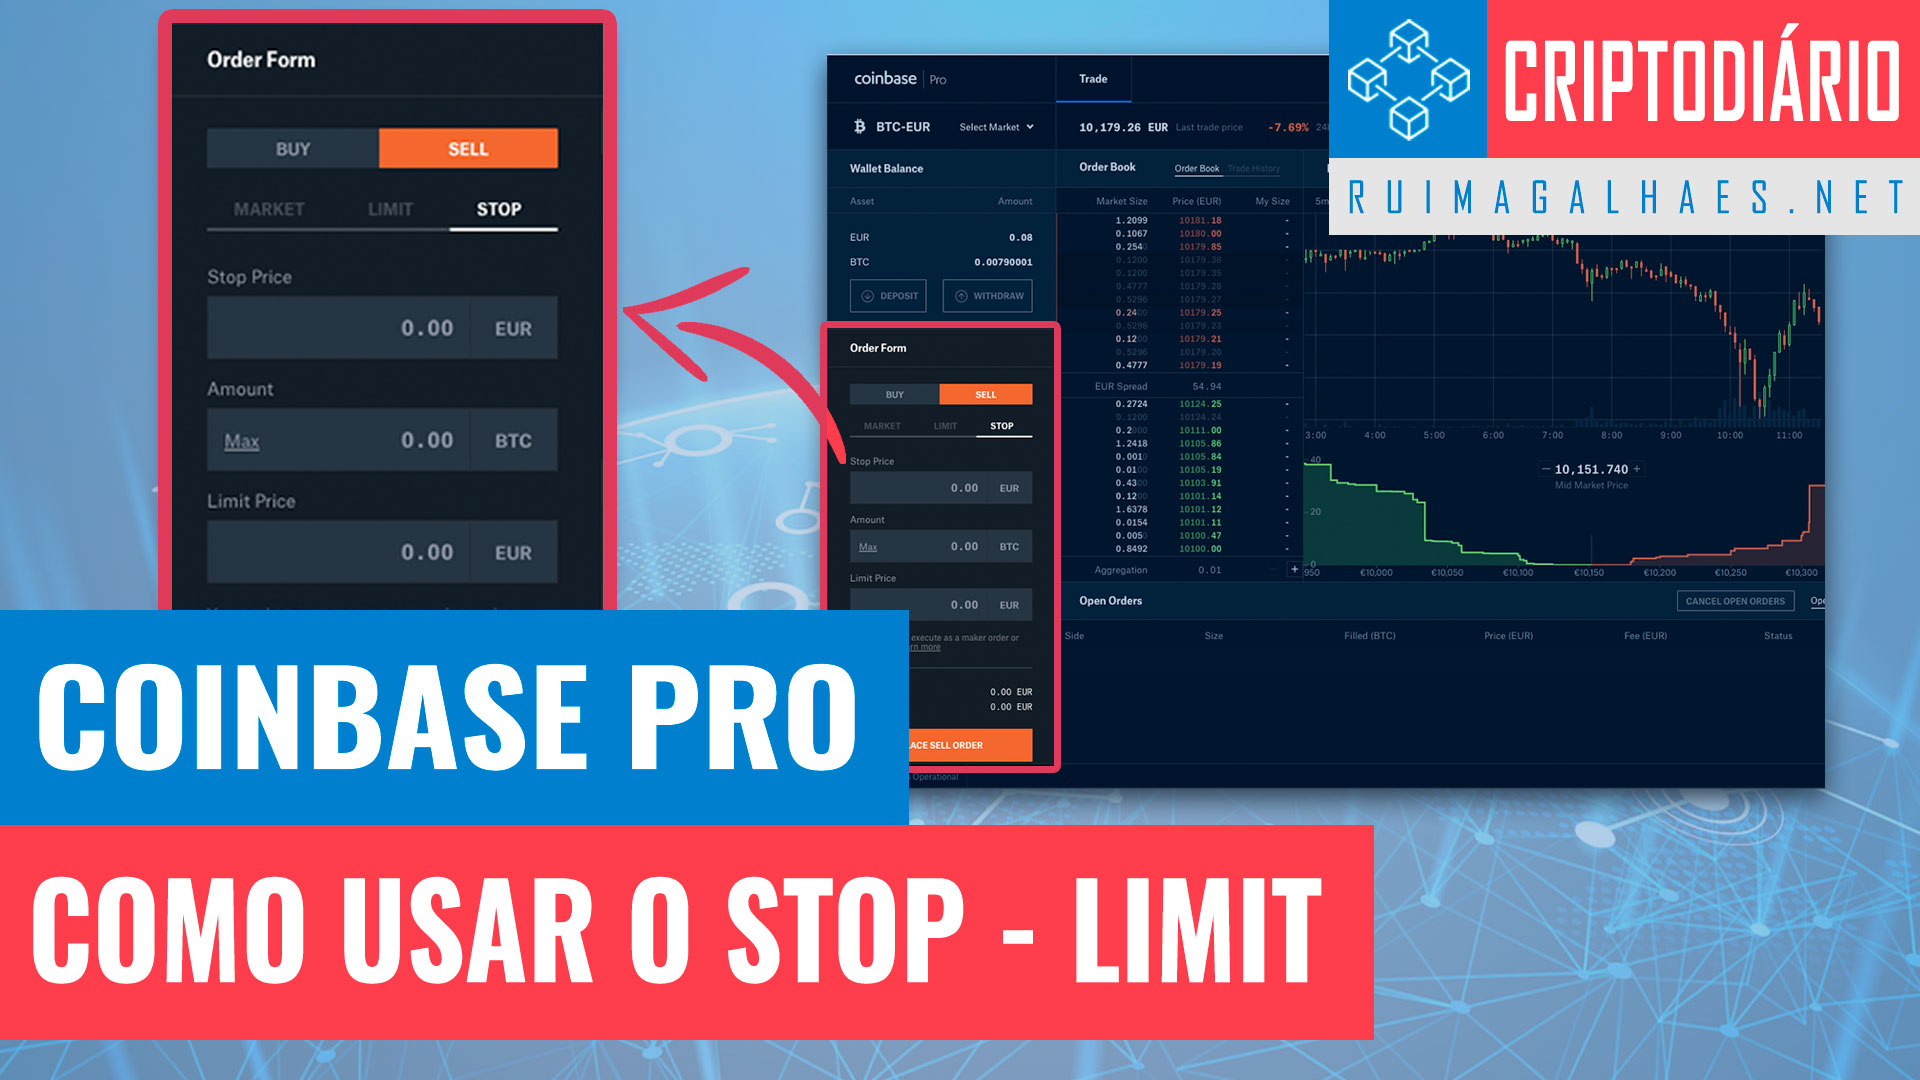 stop order on coinbase